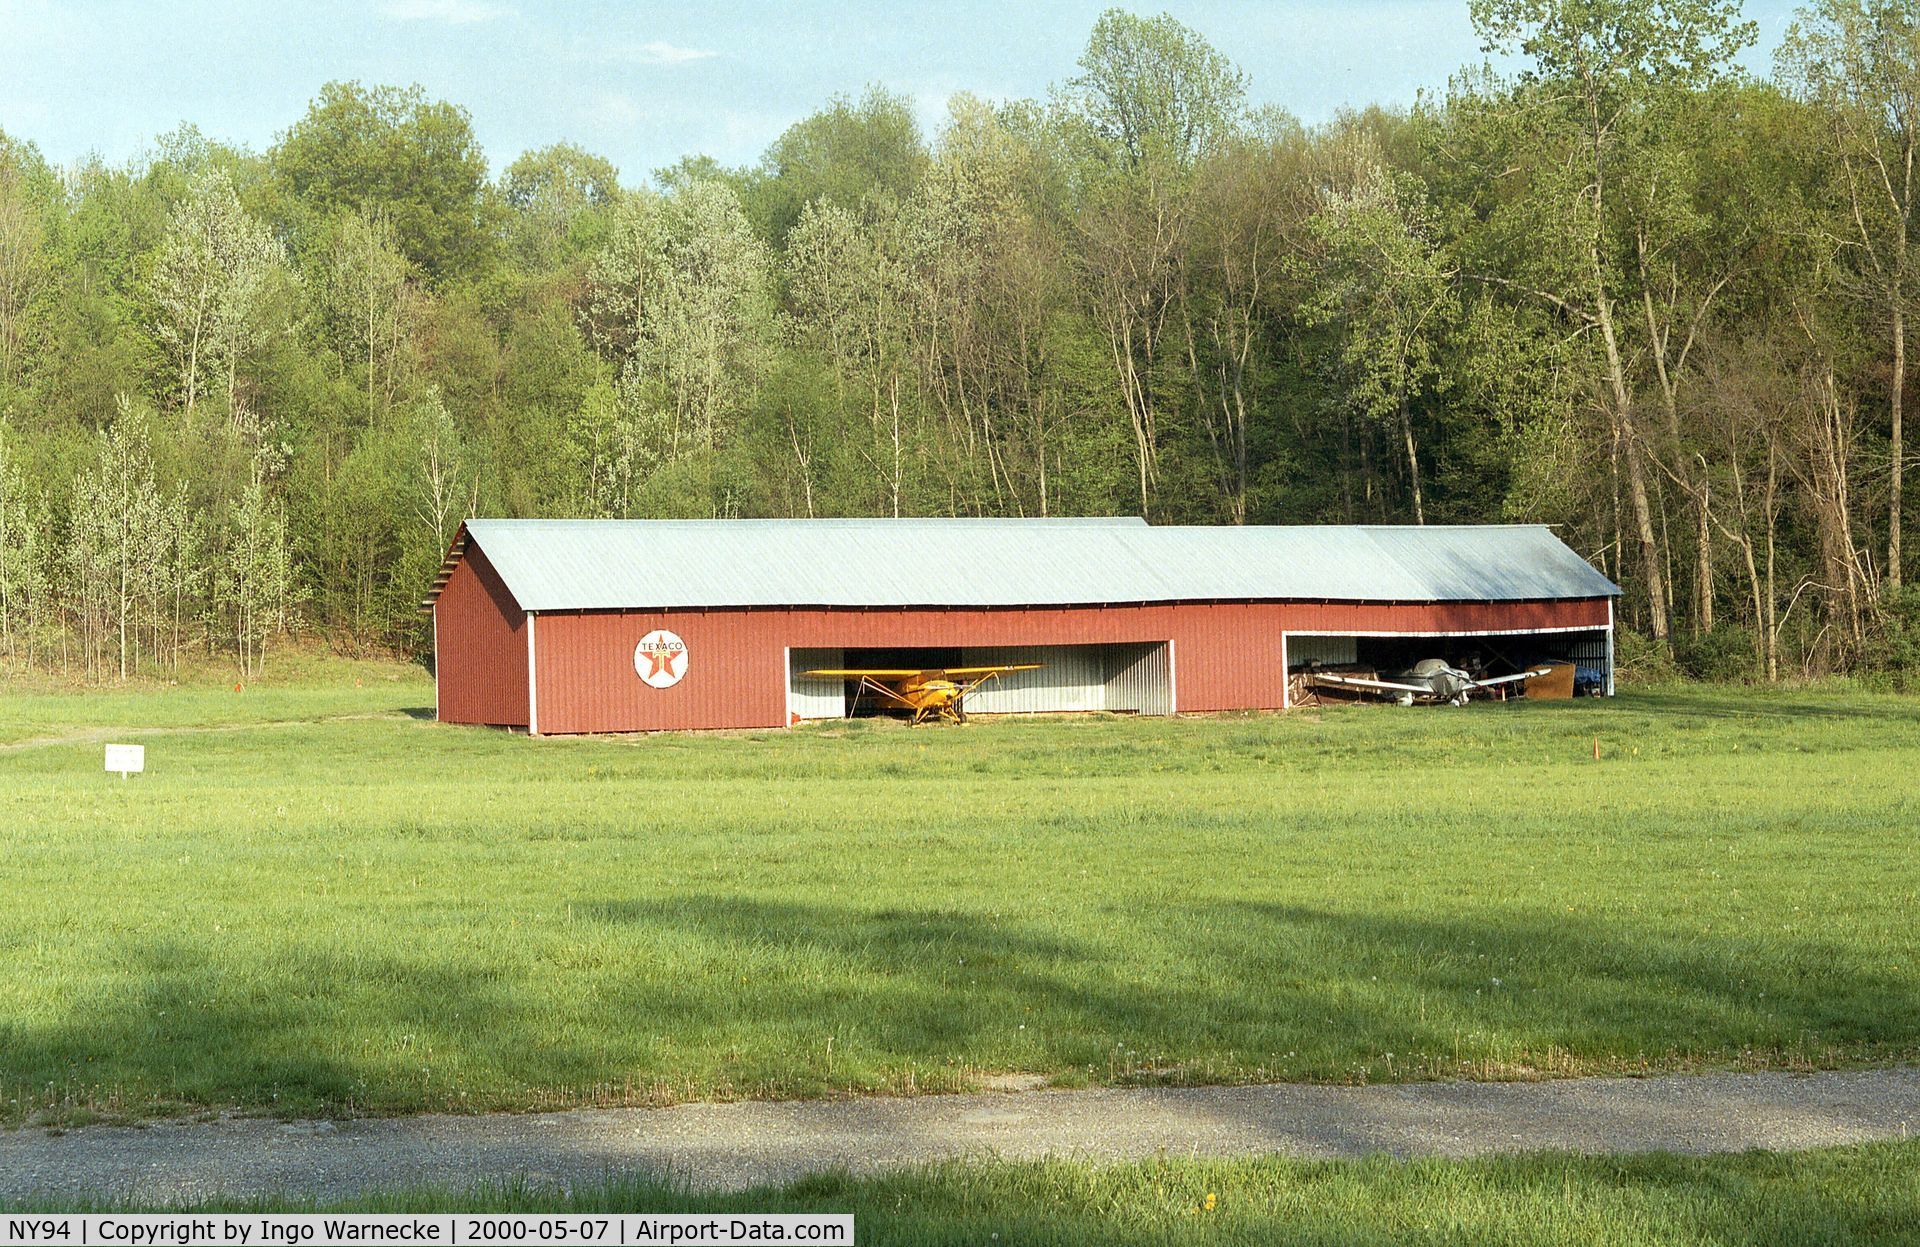 Old Rhinebeck Airport (NY94) - the red hangar across the field